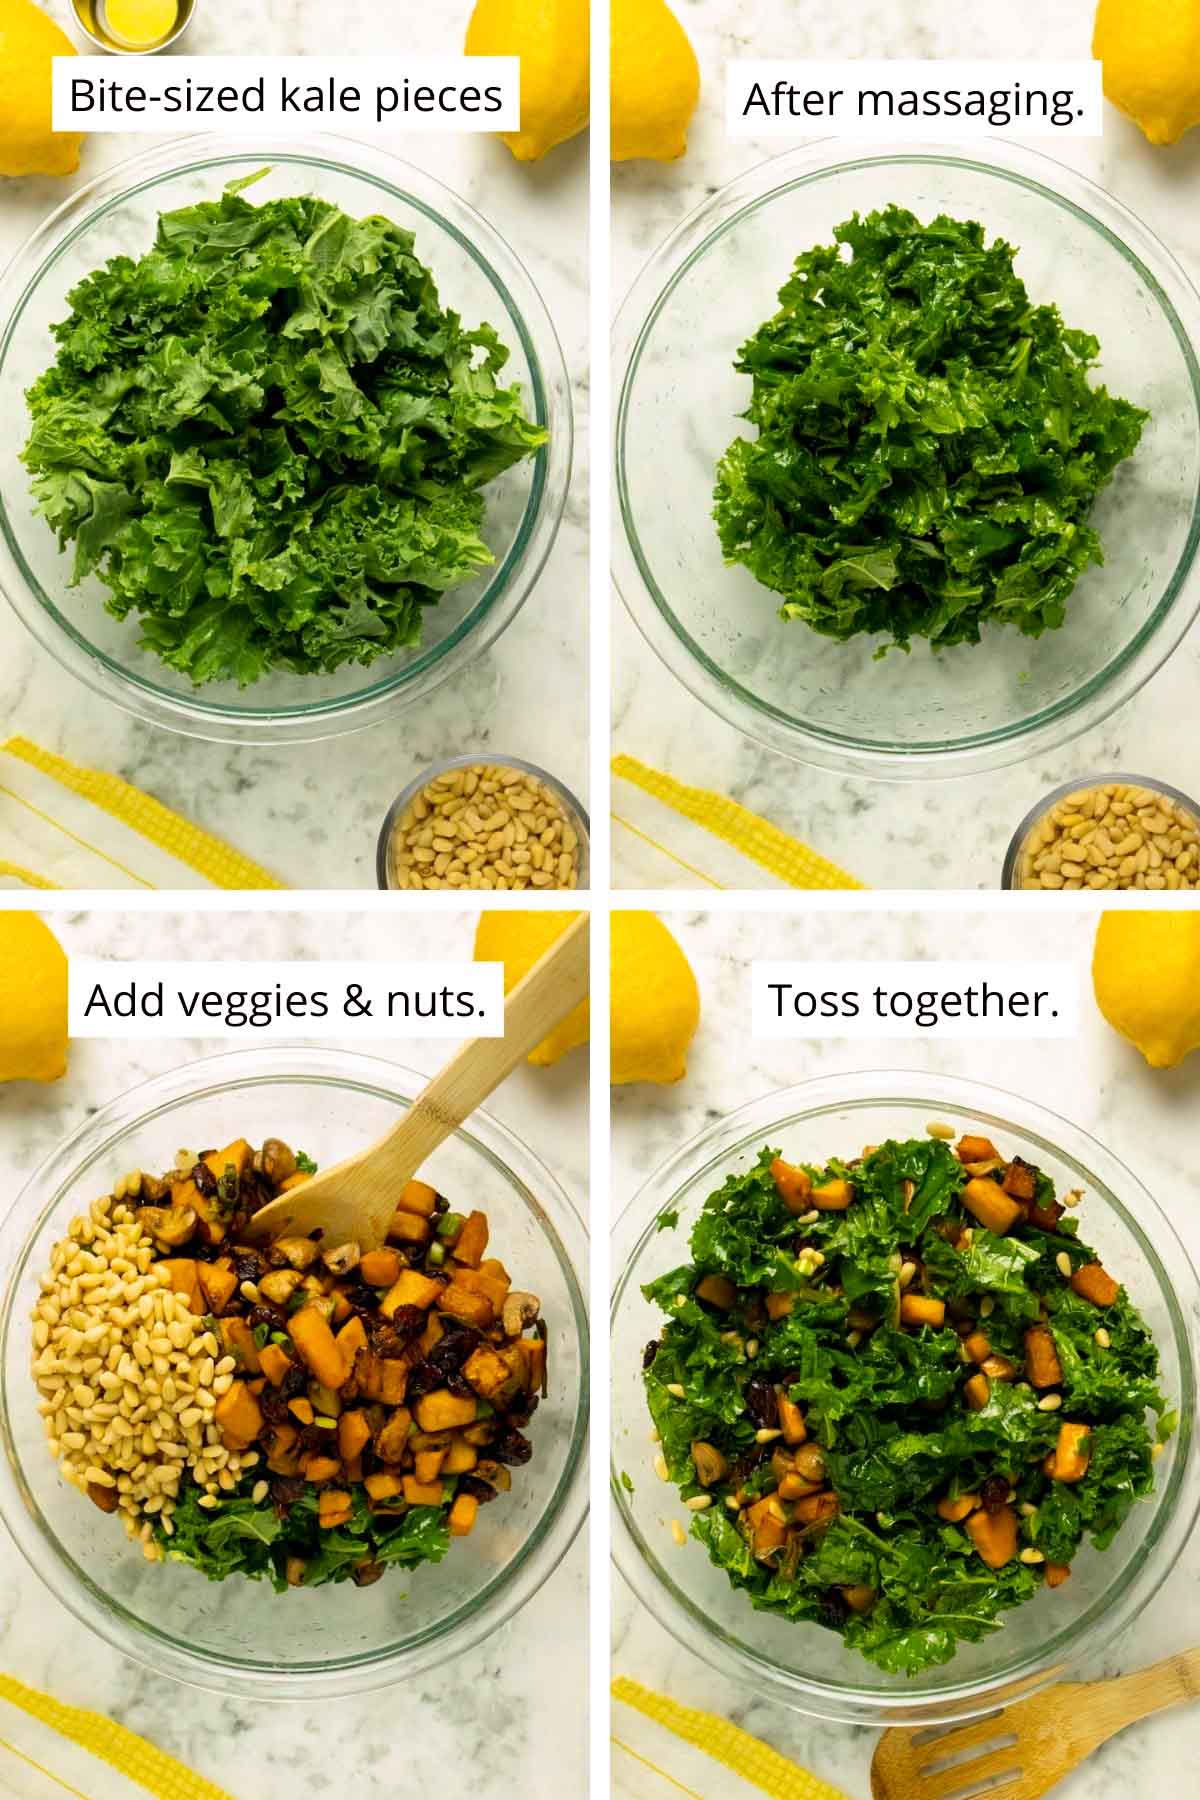 image collage of kale before and after massaging and adding and tossing in the other salad ingredients